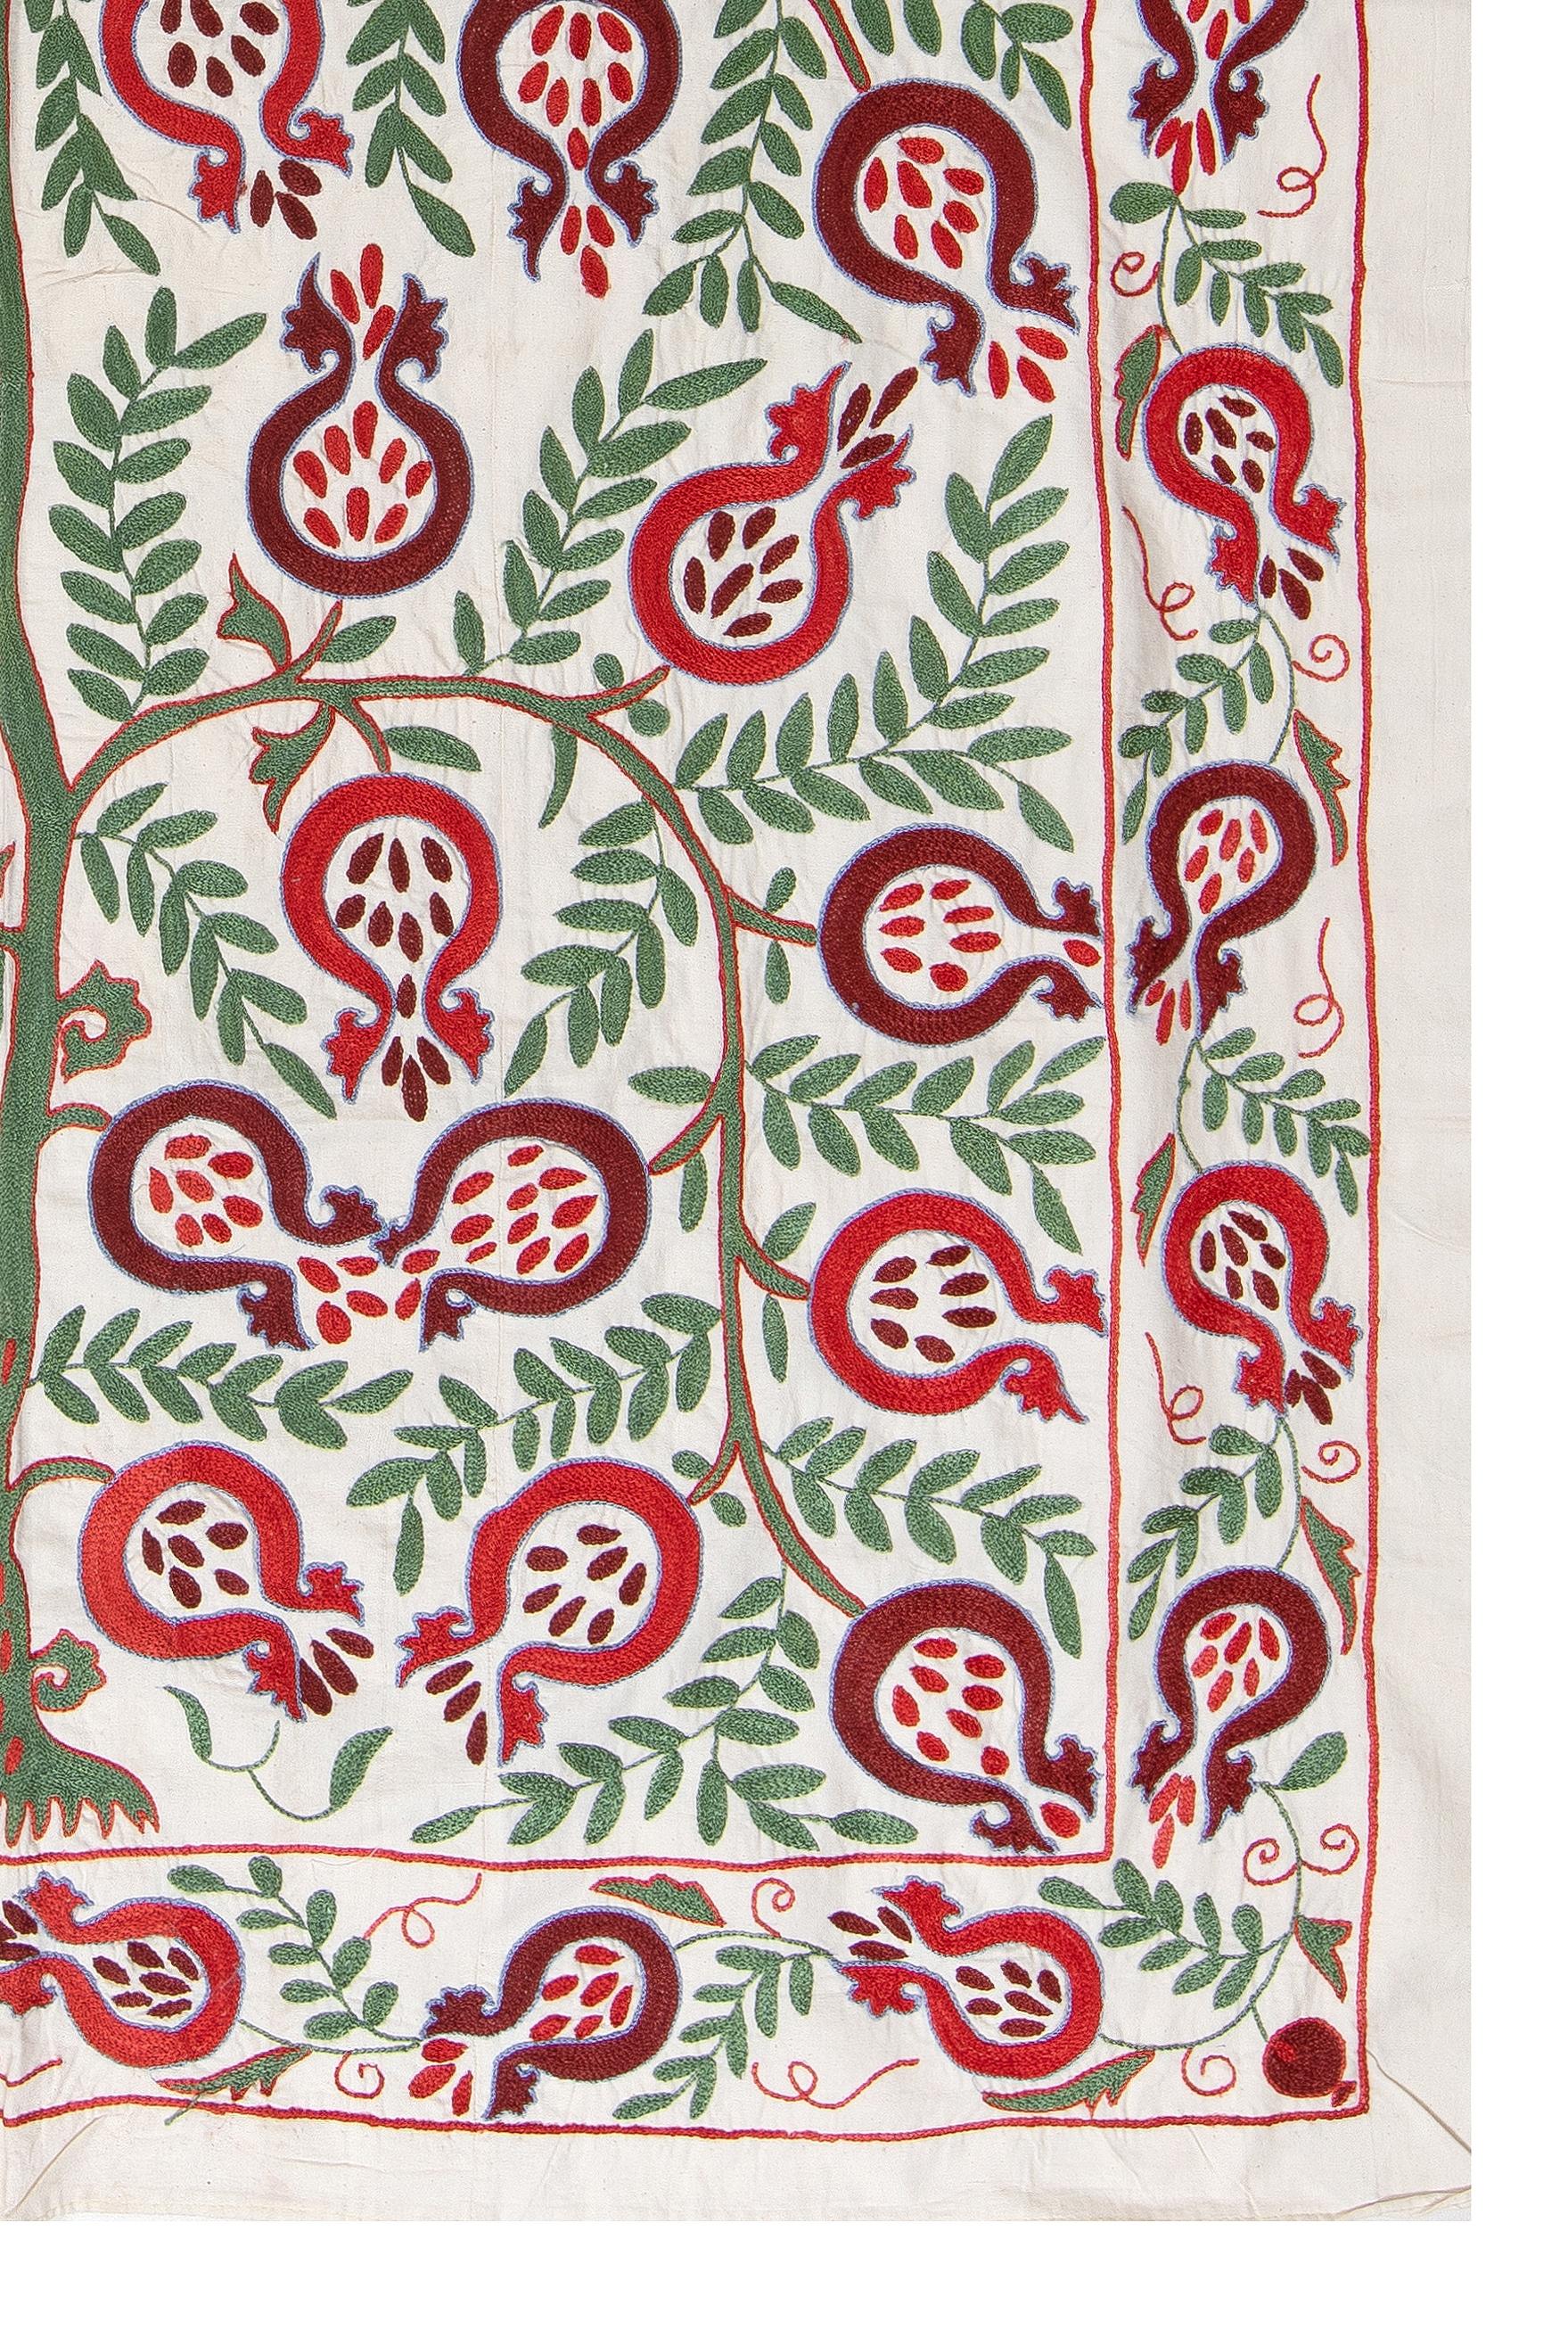 Cotton 4.7x7 Ft Silk Suzani Pomegranate Tree Design Wall Hanging, Embroidered Bedspread